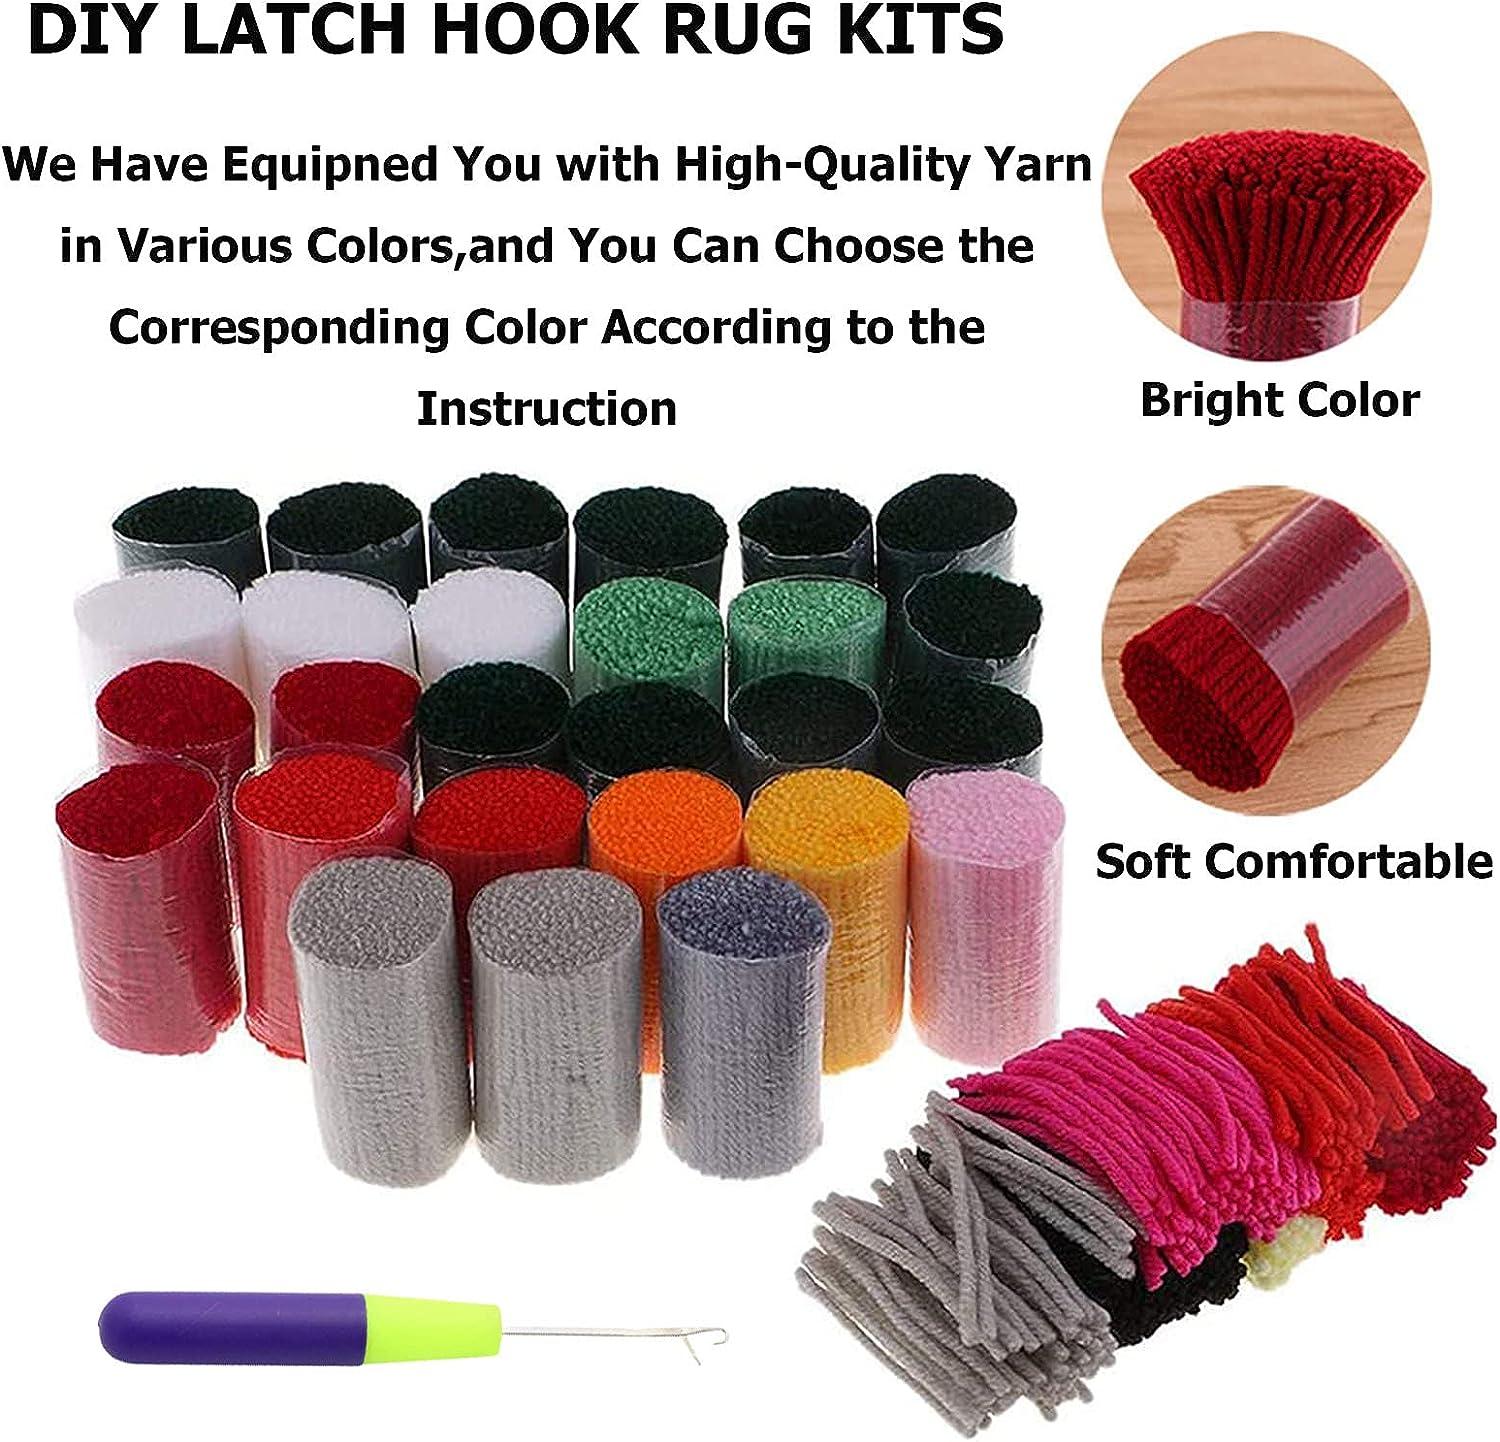 EVAJE Latch Hook Kit for Adults DIY Rug Making Kits with Preprinted Canvas  Cute Sloth Pattern Unfinished Crochet Embroidery Carpet Set Shaggy  Decorations 20.5in